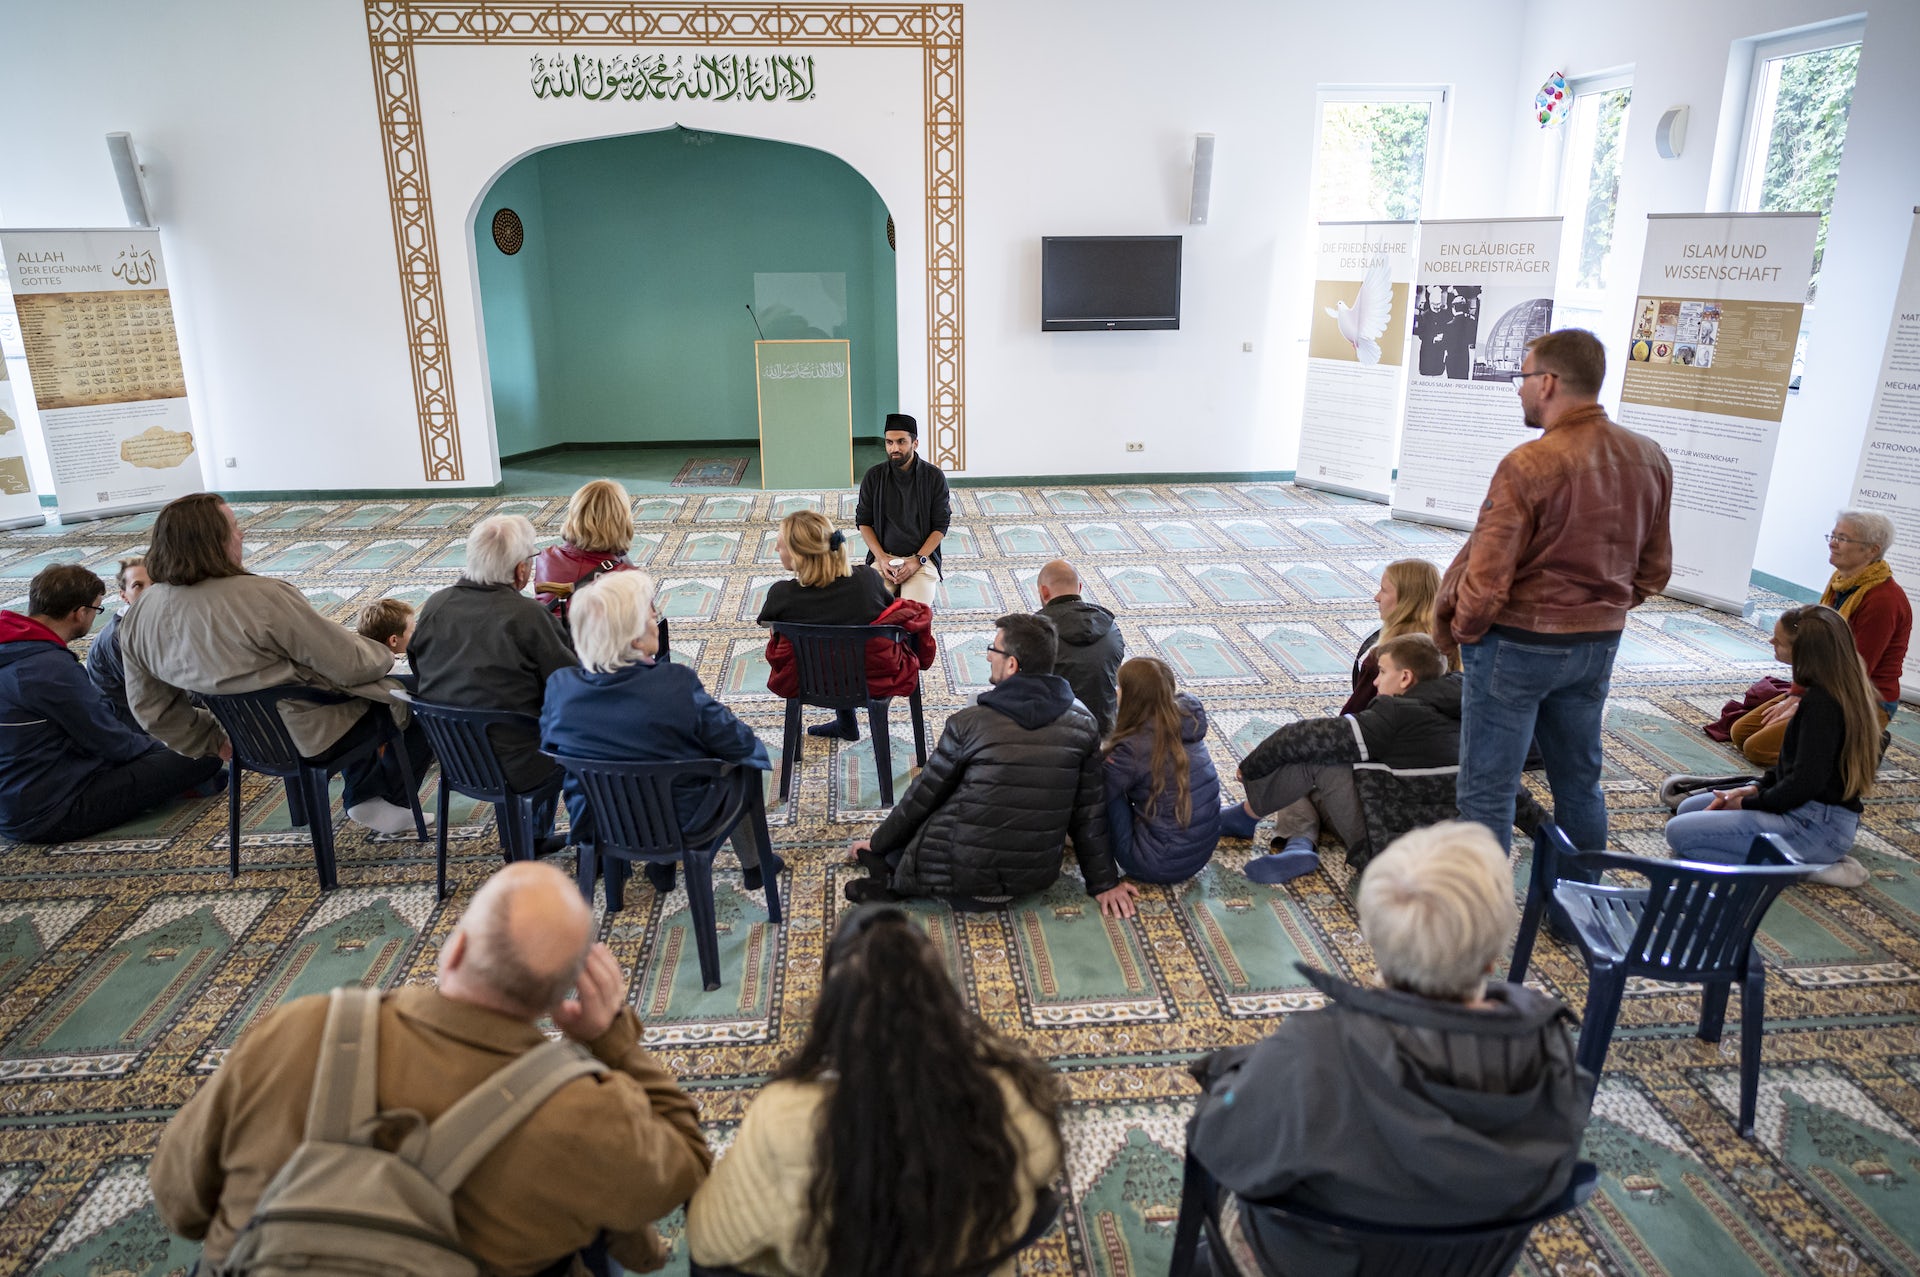 A group of people inside a mosque sit on a carpeted floor listening to The imam of the Khadija Mosque